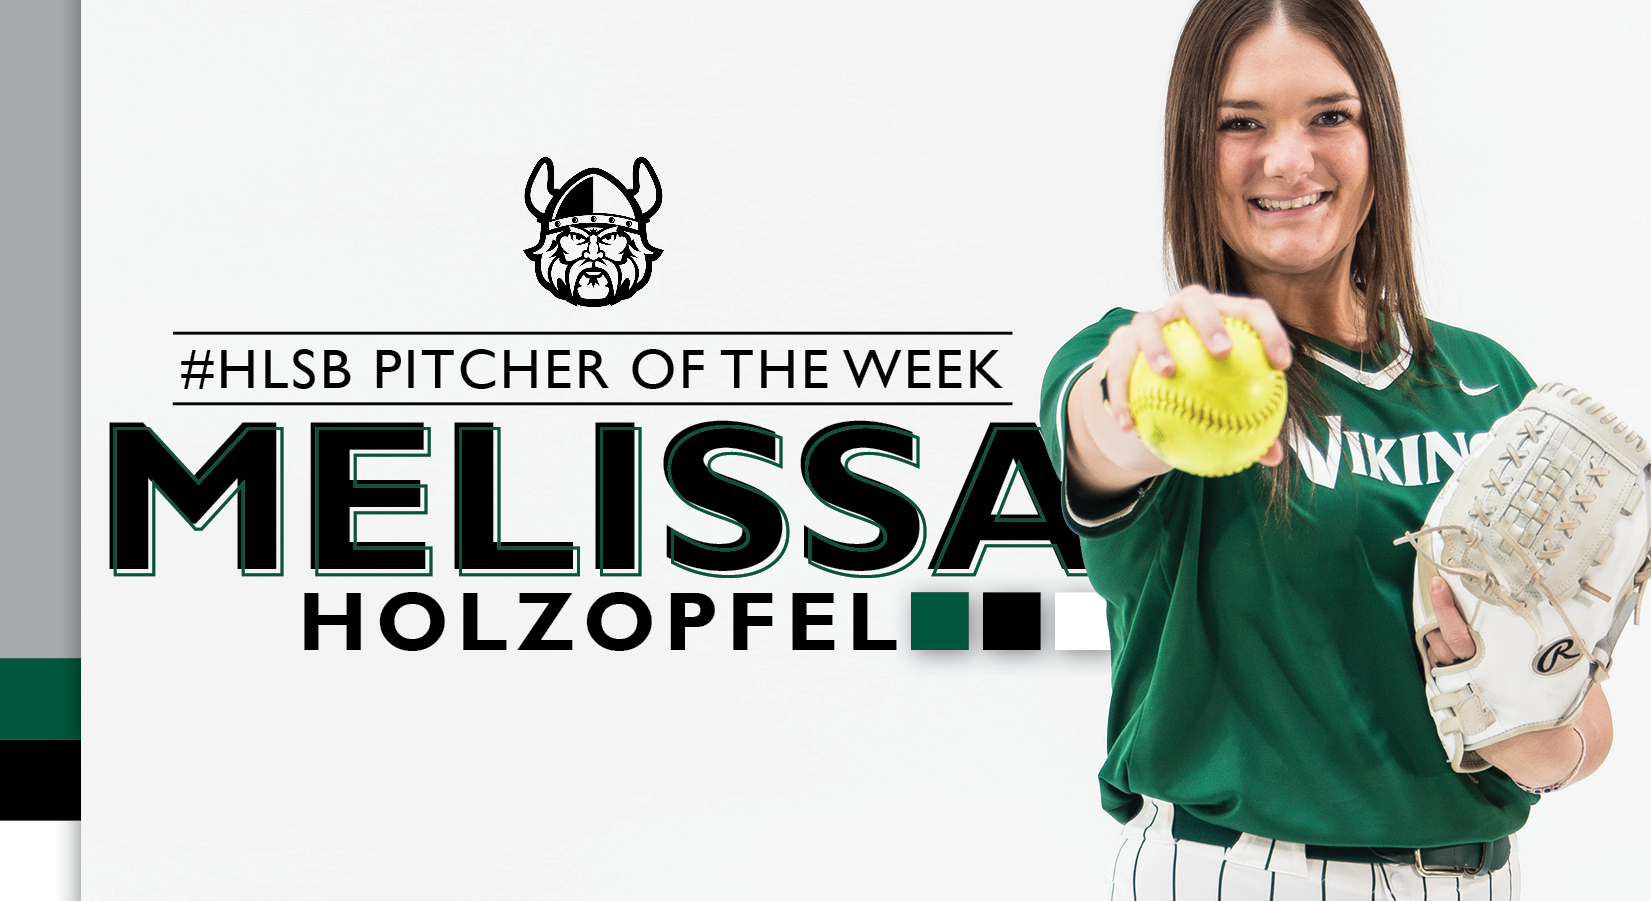 Holzopfel Named #HLSB Pitcher of the Week